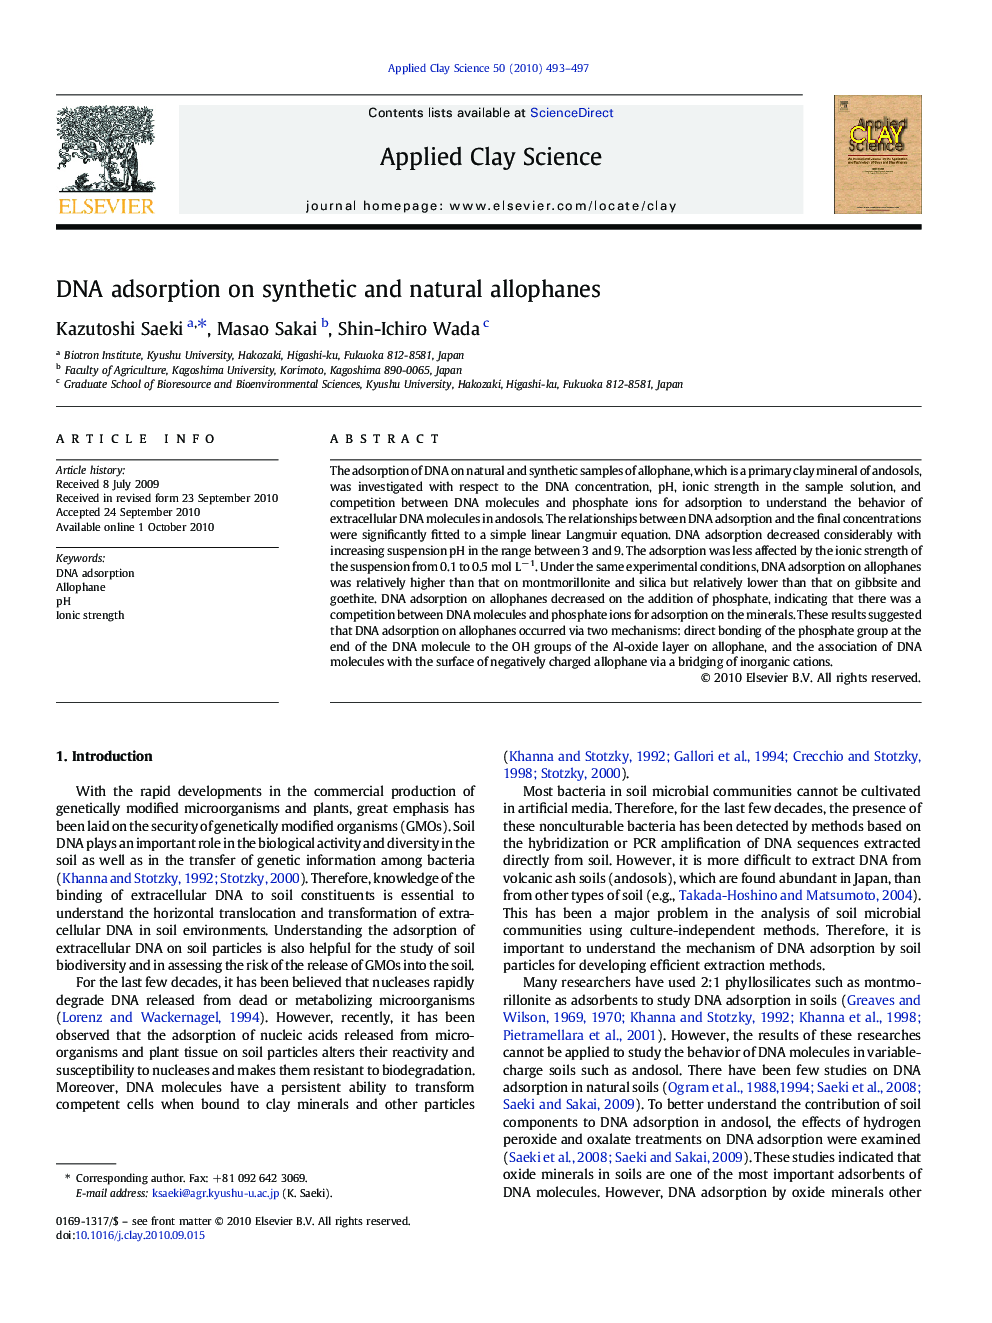 DNA adsorption on synthetic and natural allophanes